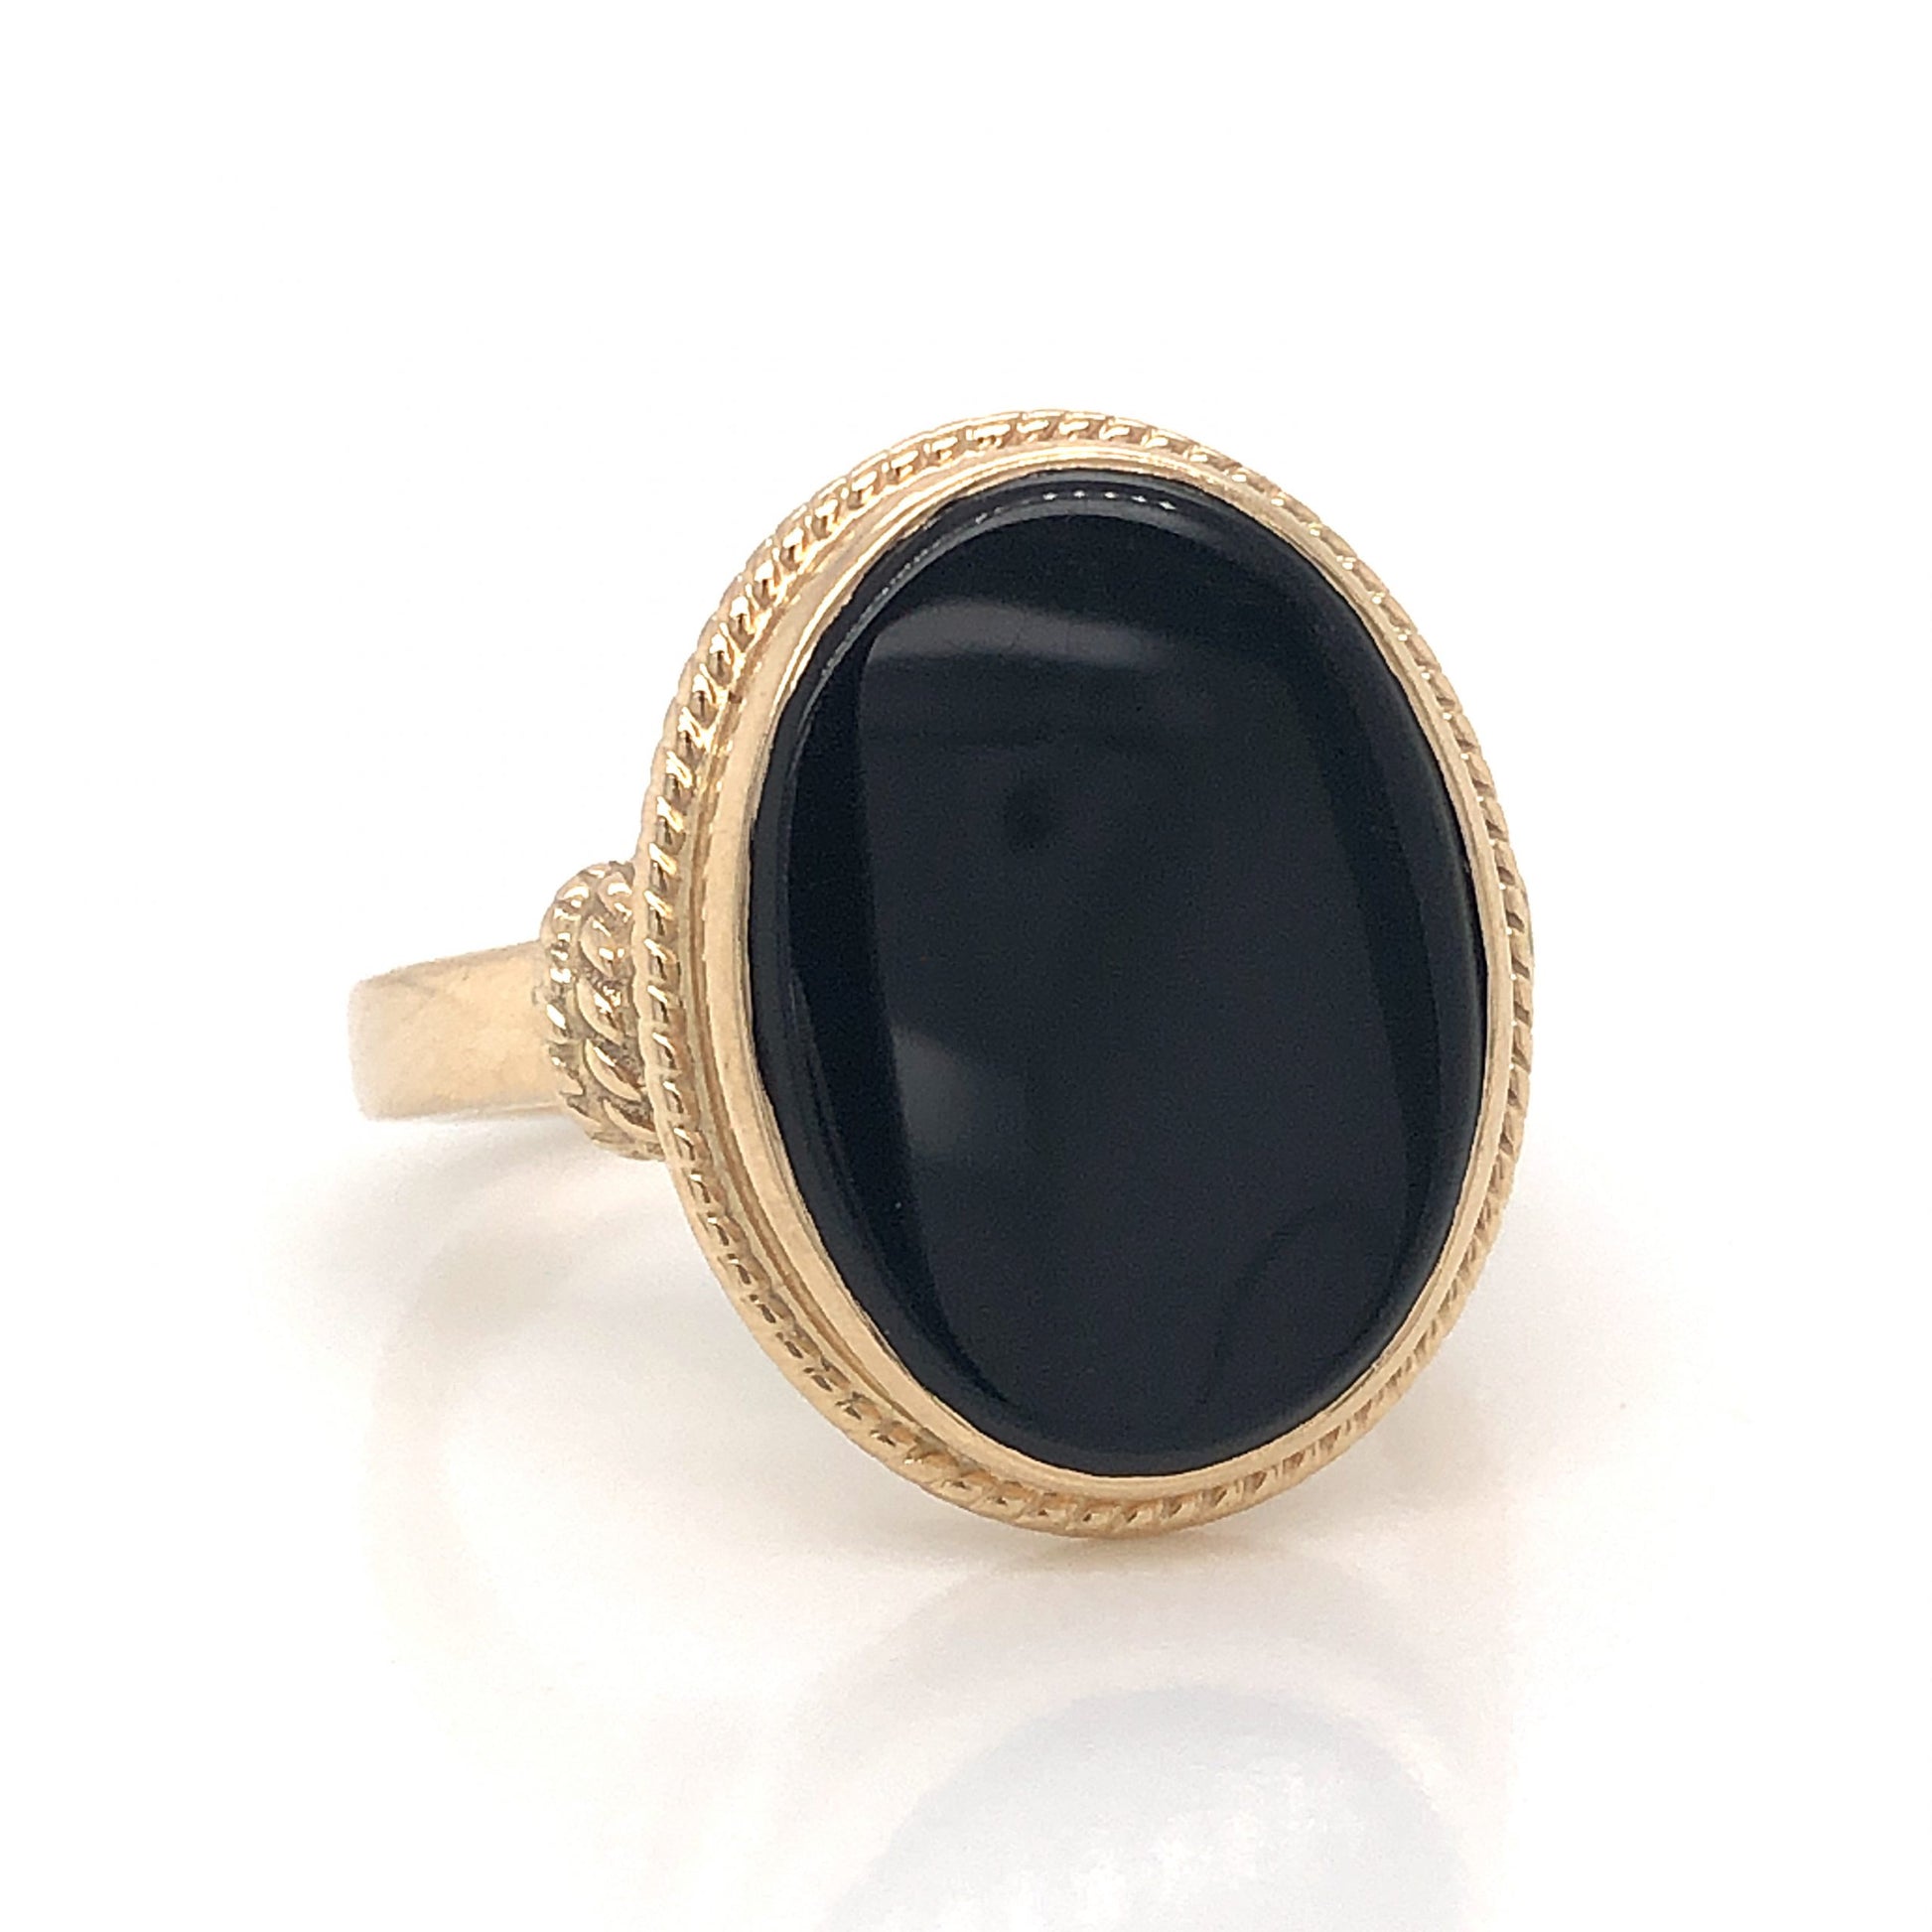 Mid-Century Onyx Cocktail Ring 14k Yellow GoldComposition: 14 Karat Yellow GoldRing Size: 7.25Total Gram Weight: 5.2 gInscription: 14k